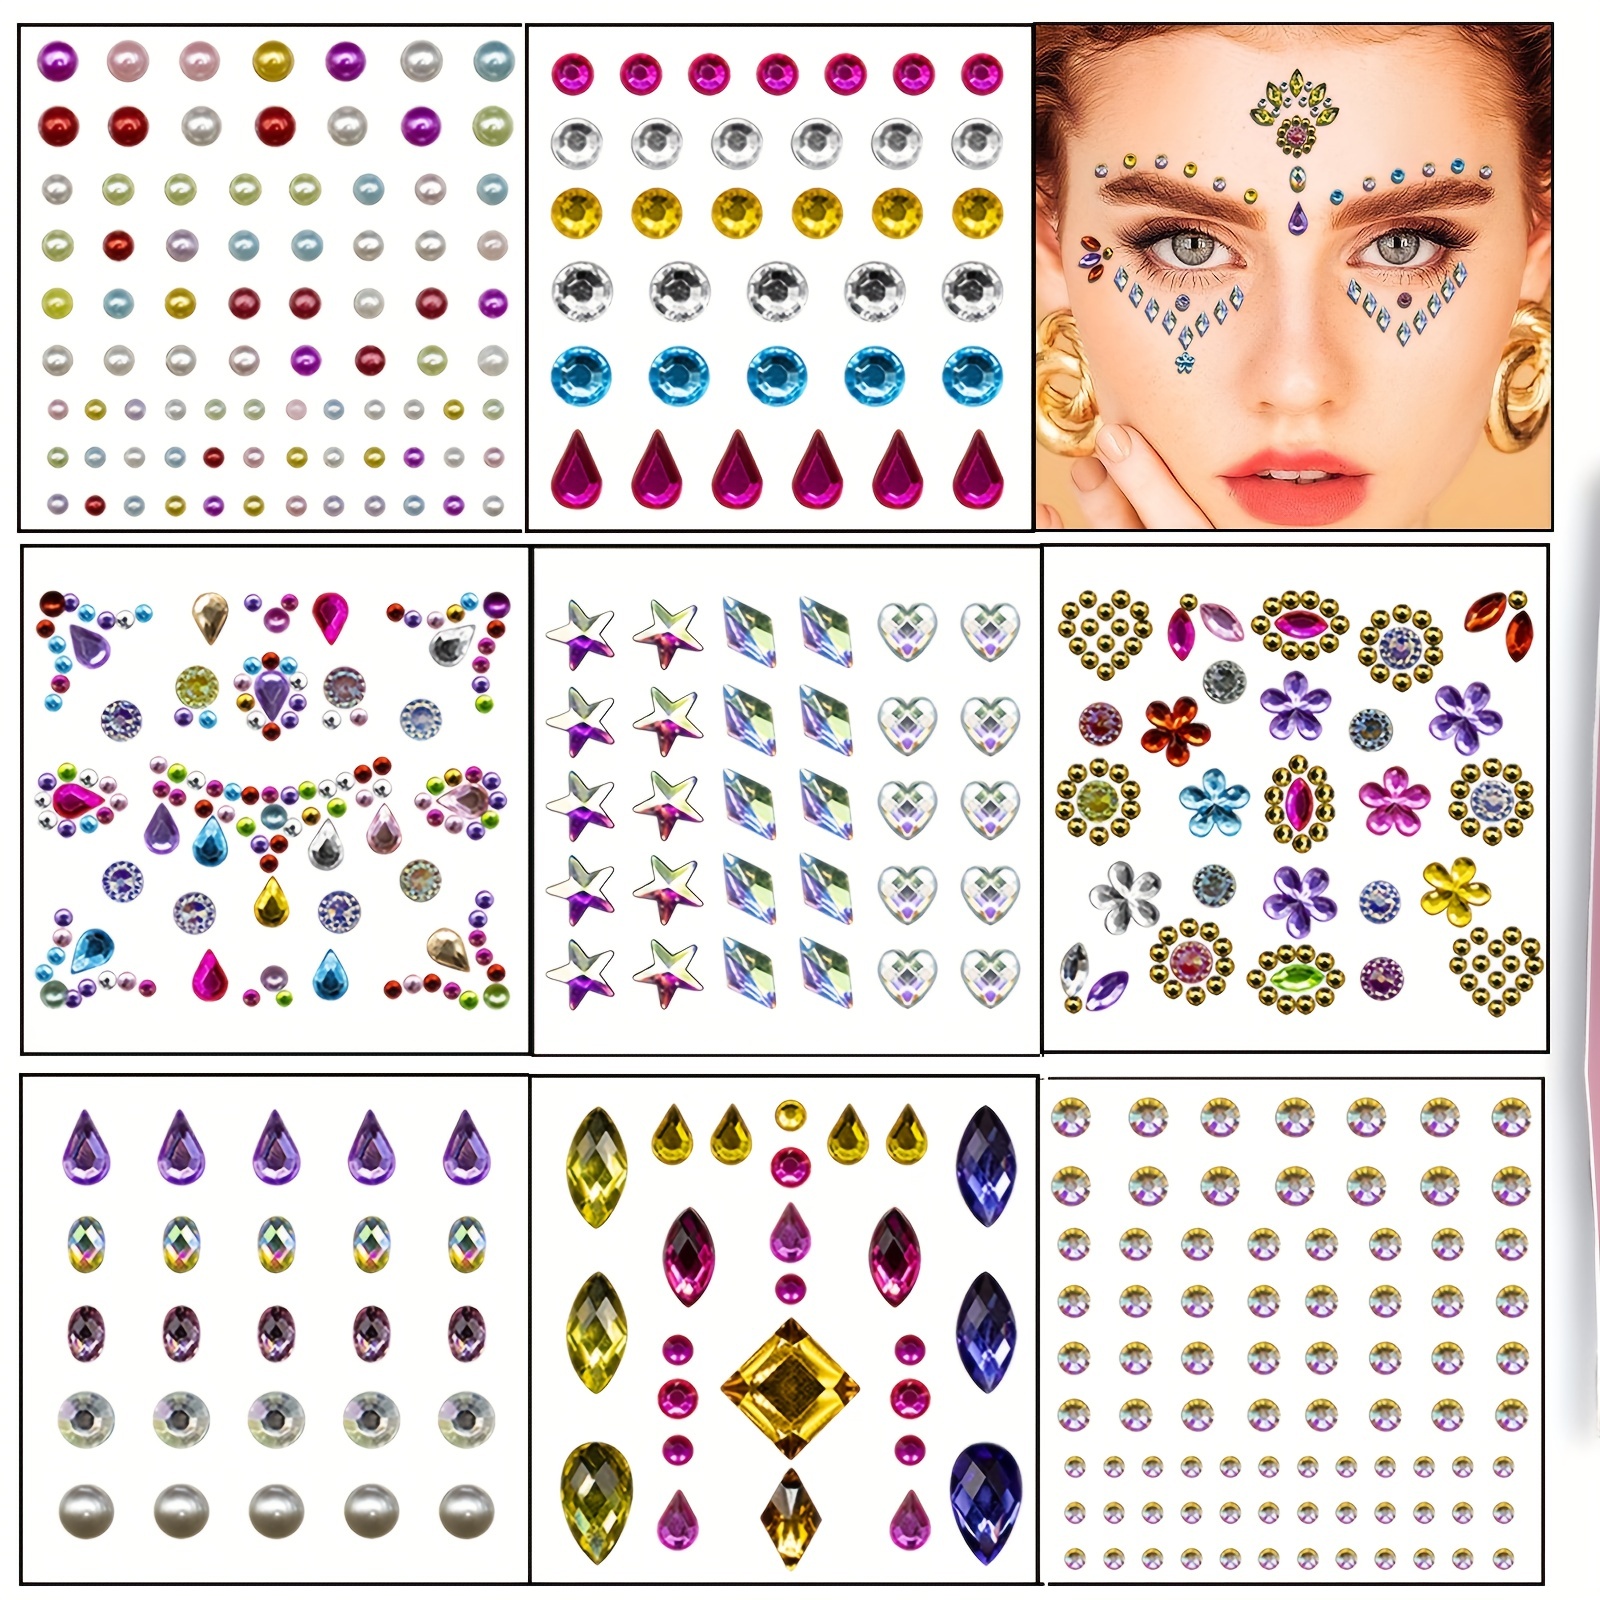 6 SHEETS RHINESTONE Face Stickers Rhinestones Miss for Makeup